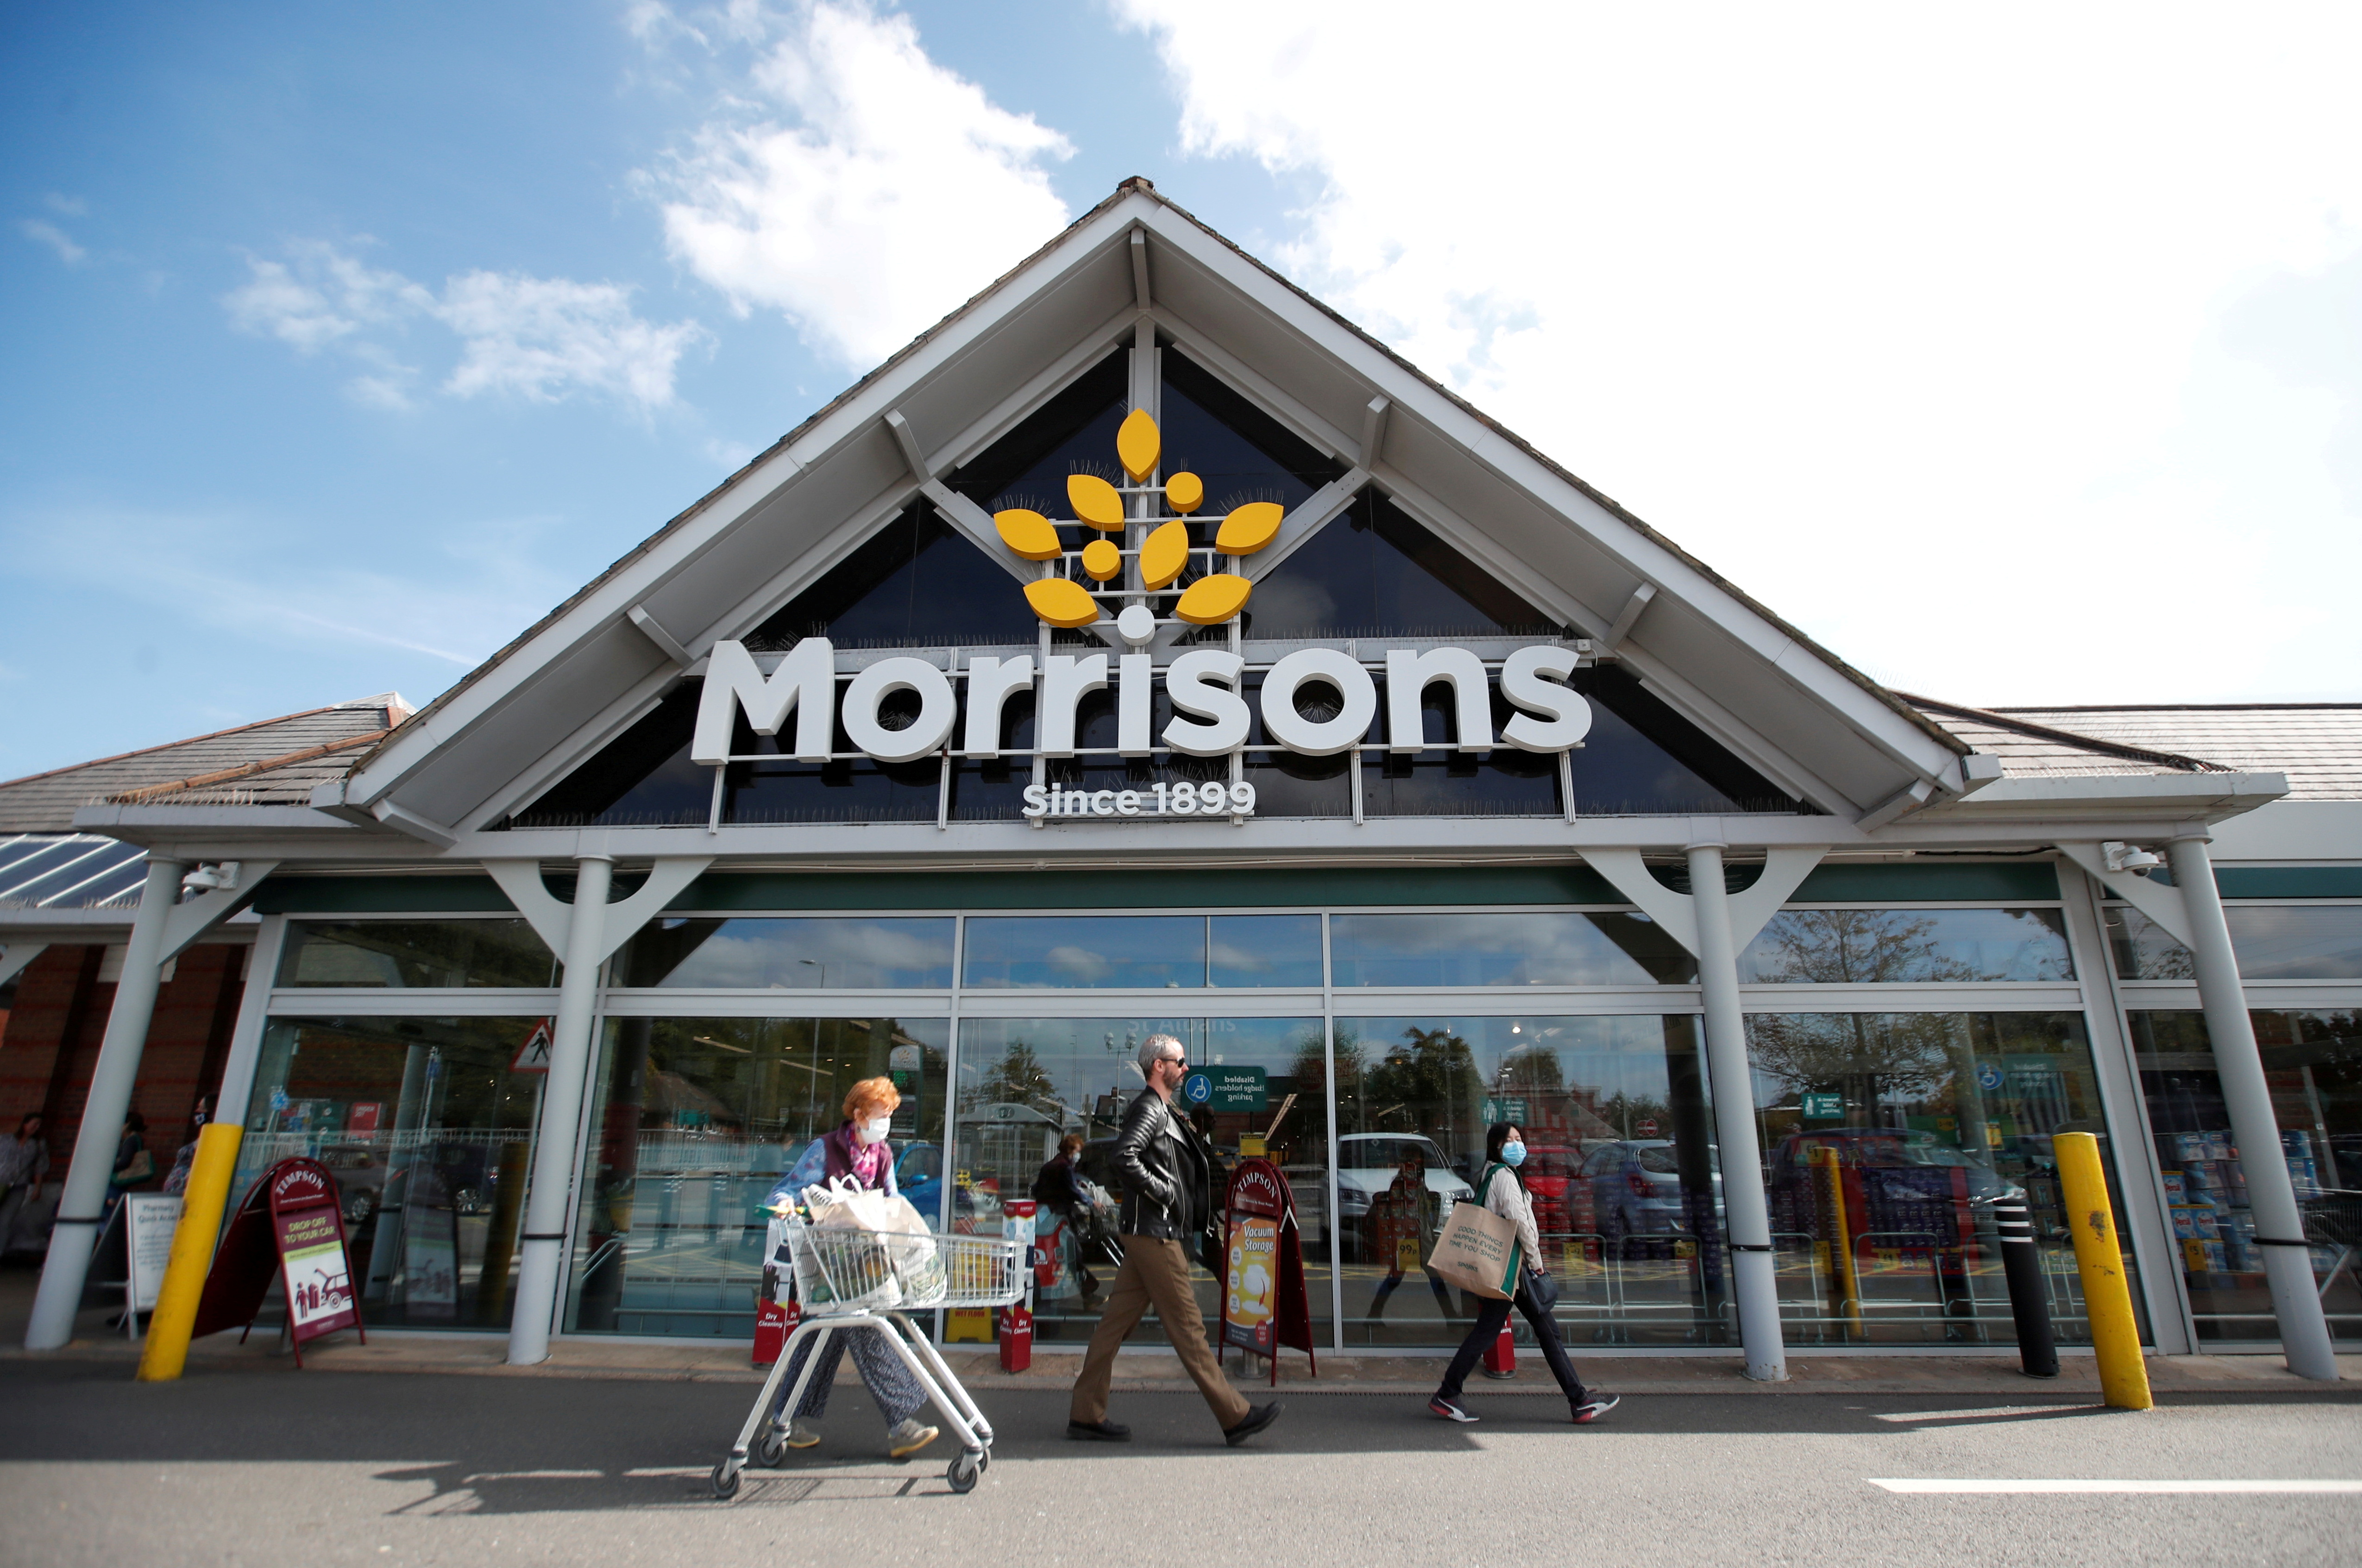 A Morrisons store is pictured in St Albans, Britain, September 10, 2020.  REUTERS/Peter Cziborra//File Photo